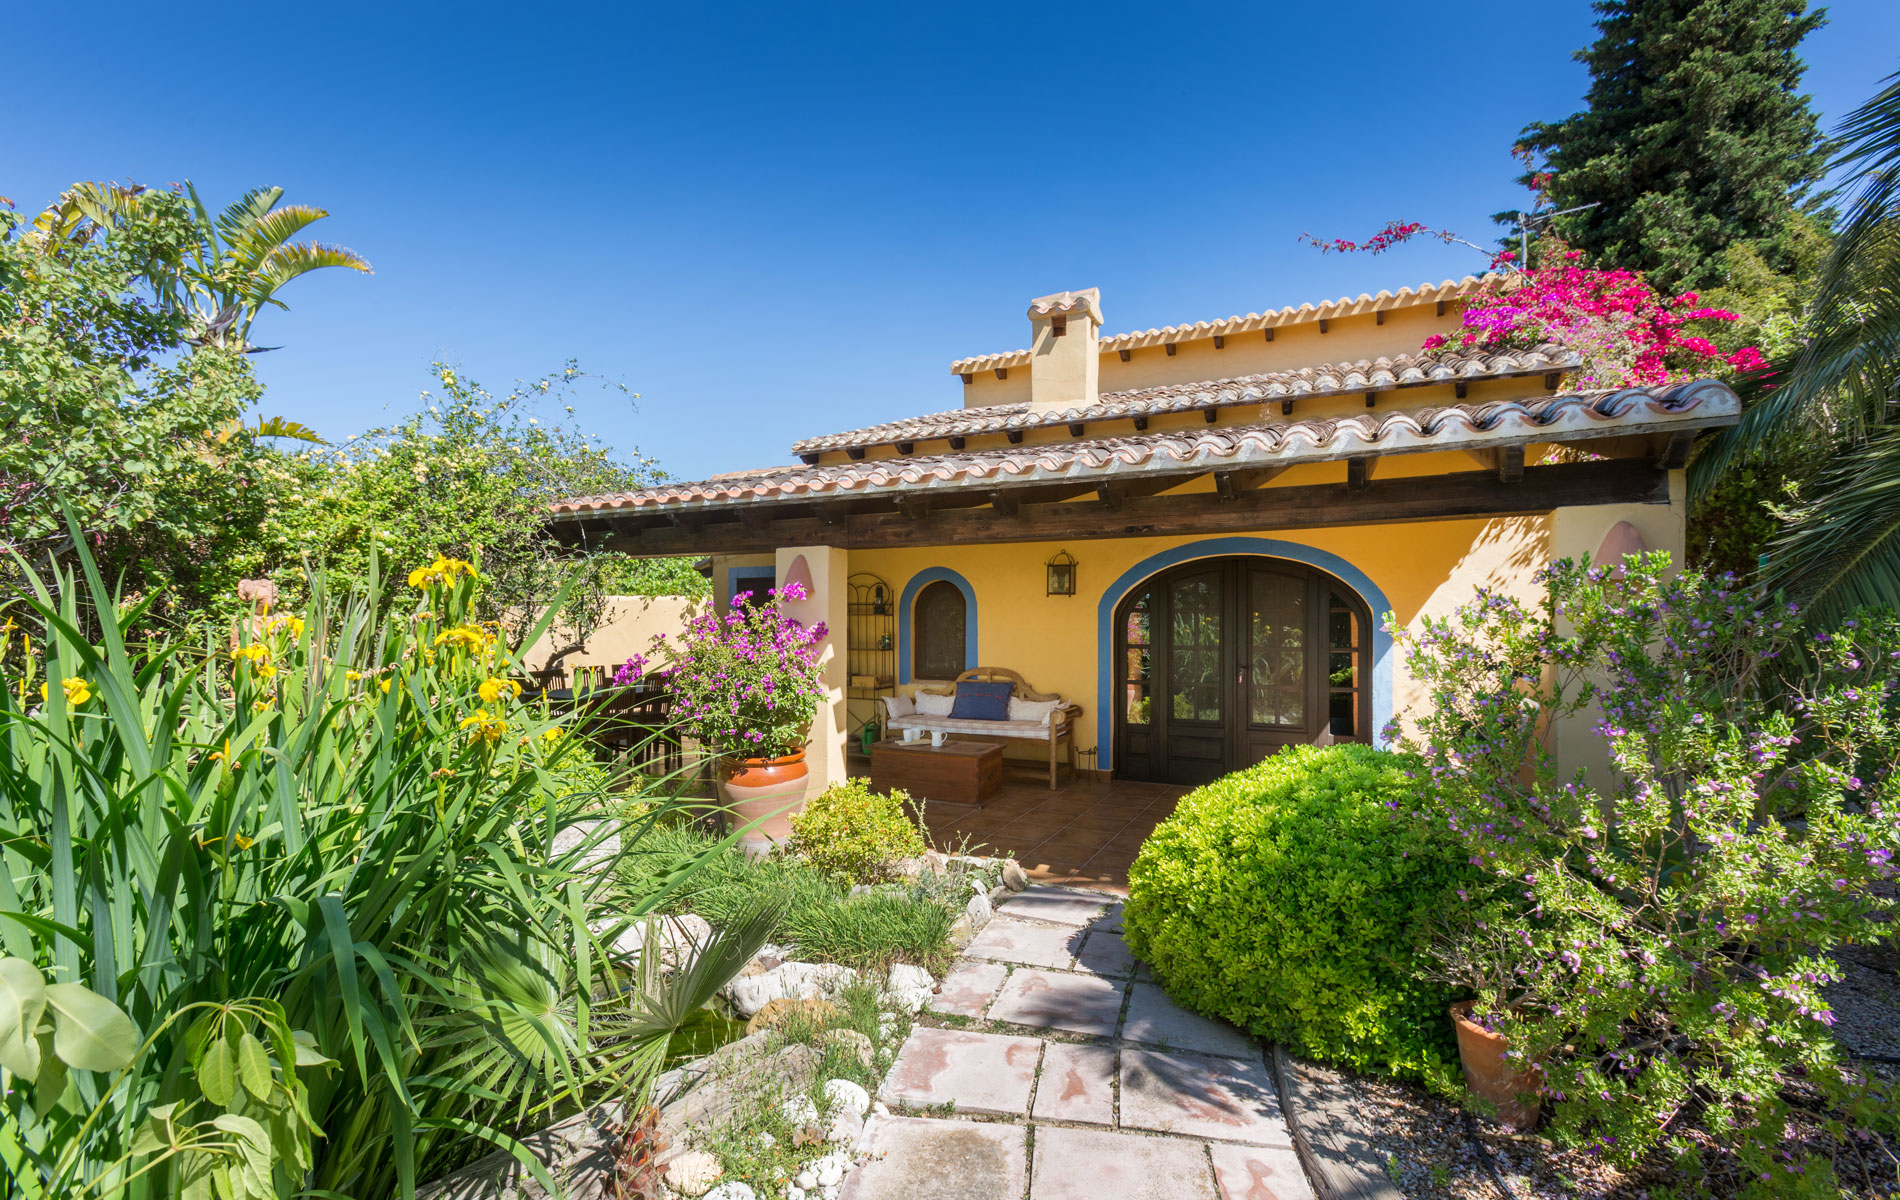 Rustic country property for sale, Teulada, Costa Blanca, sea view